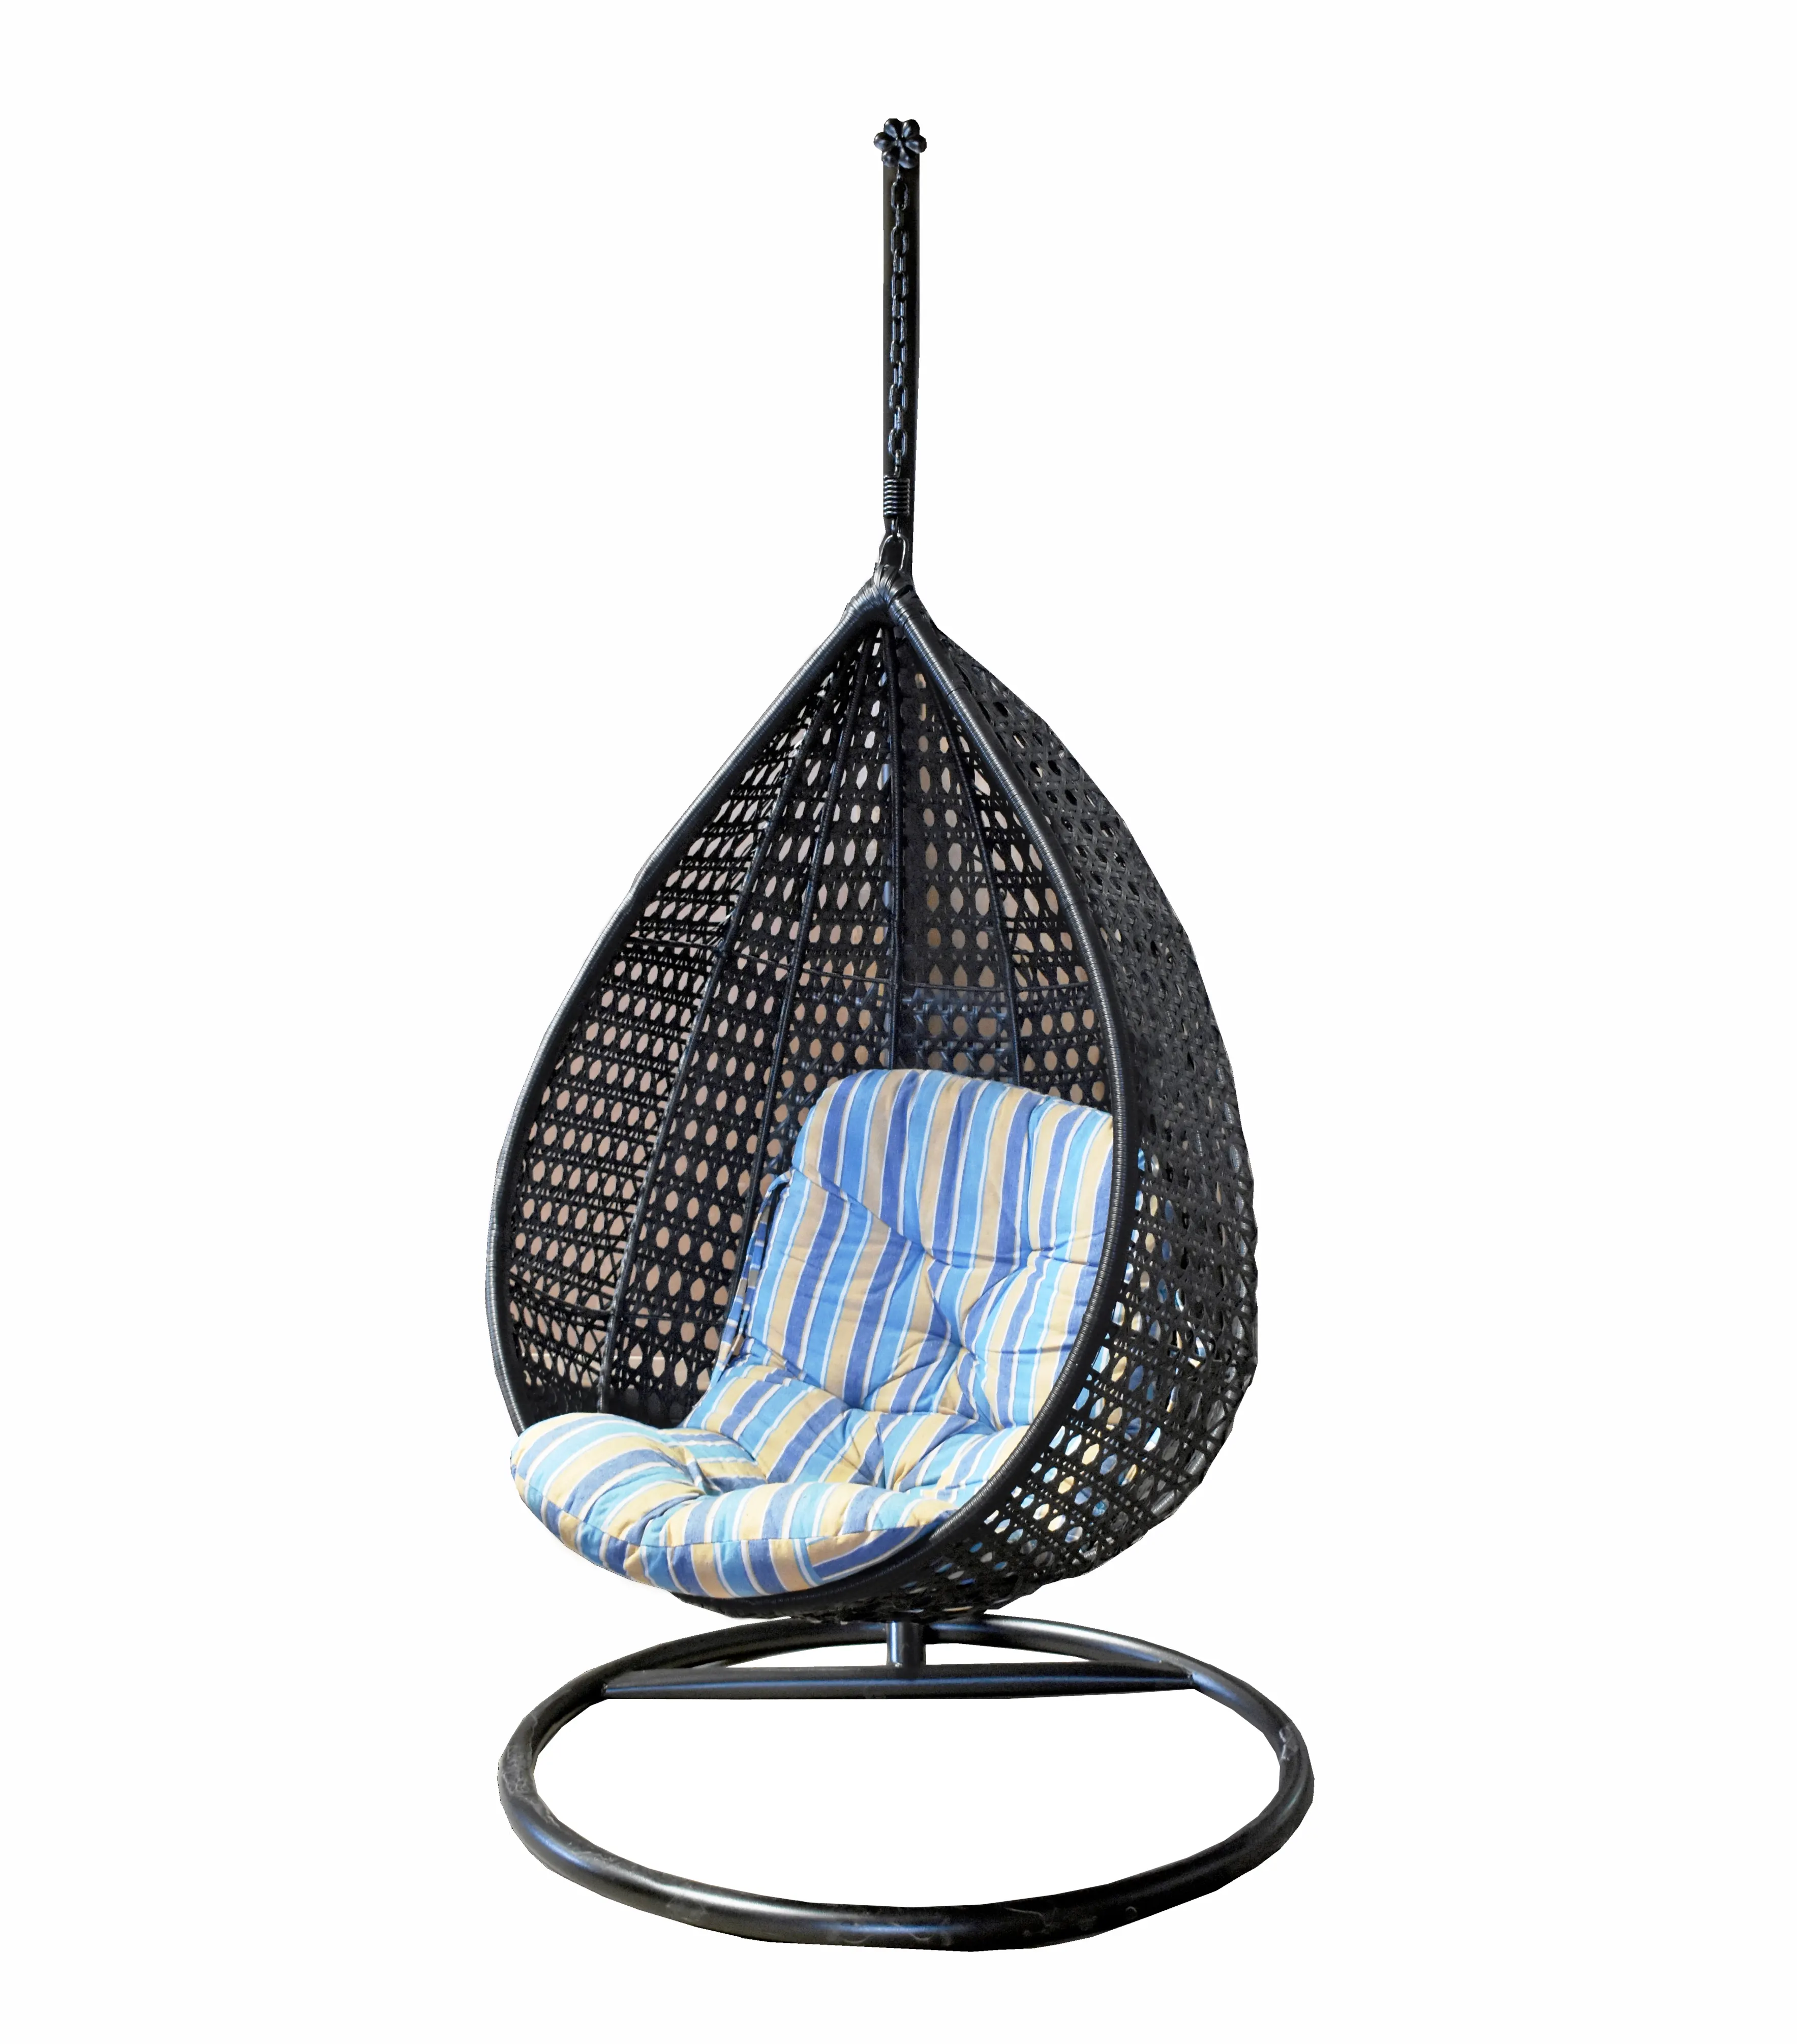 Wholesale High Quality Modern Luxury Outdoor Rattan Hanging Chair Swing Seat, Garden Balcony Hanging Chair With Cushion & Pillow